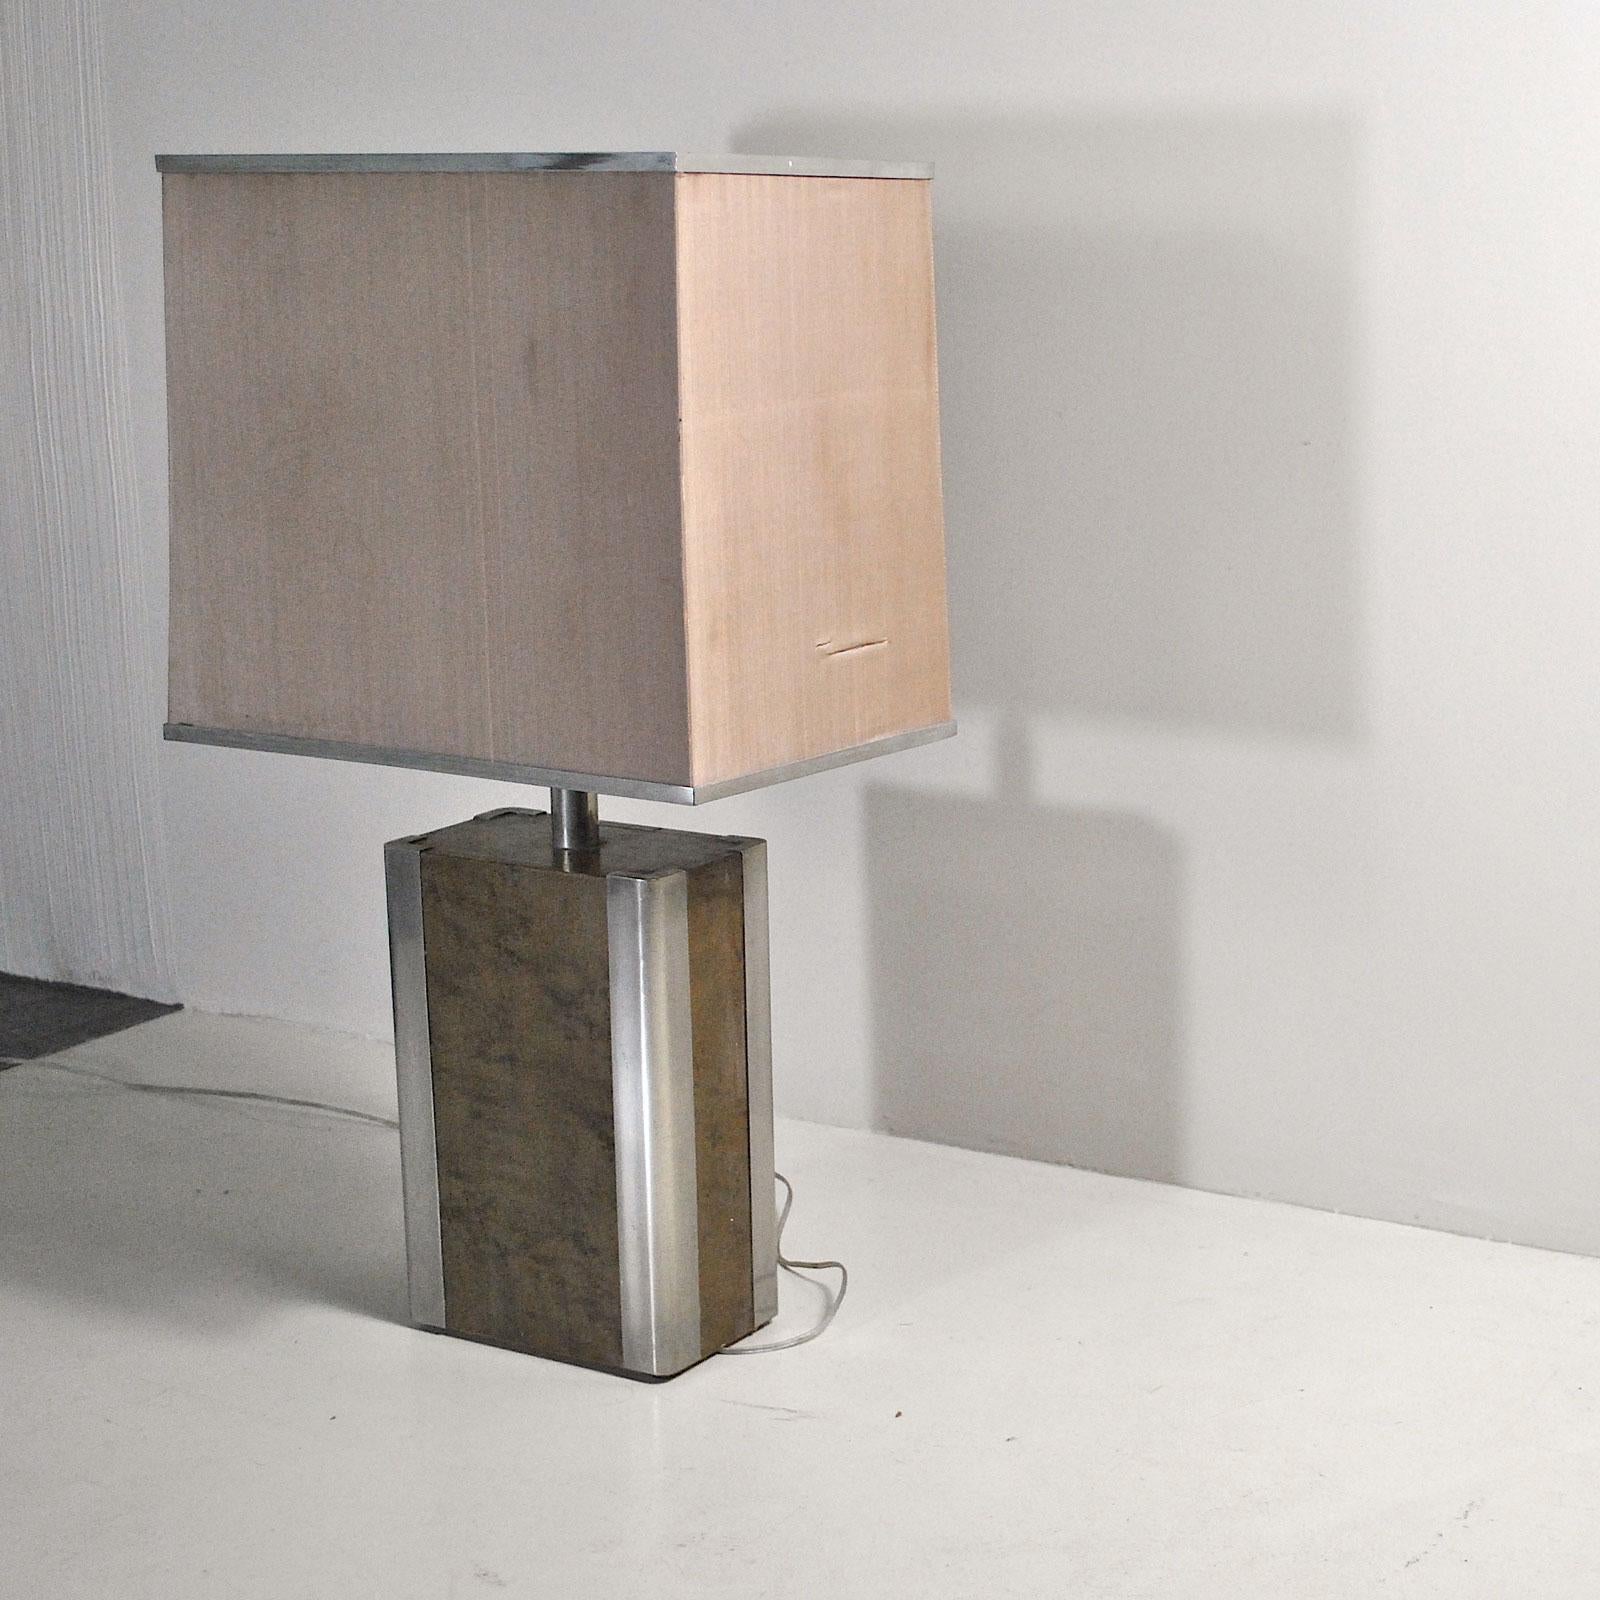 Italian Midcentury Table Lamp in Drawn Wood and Steel from the 1970s 1